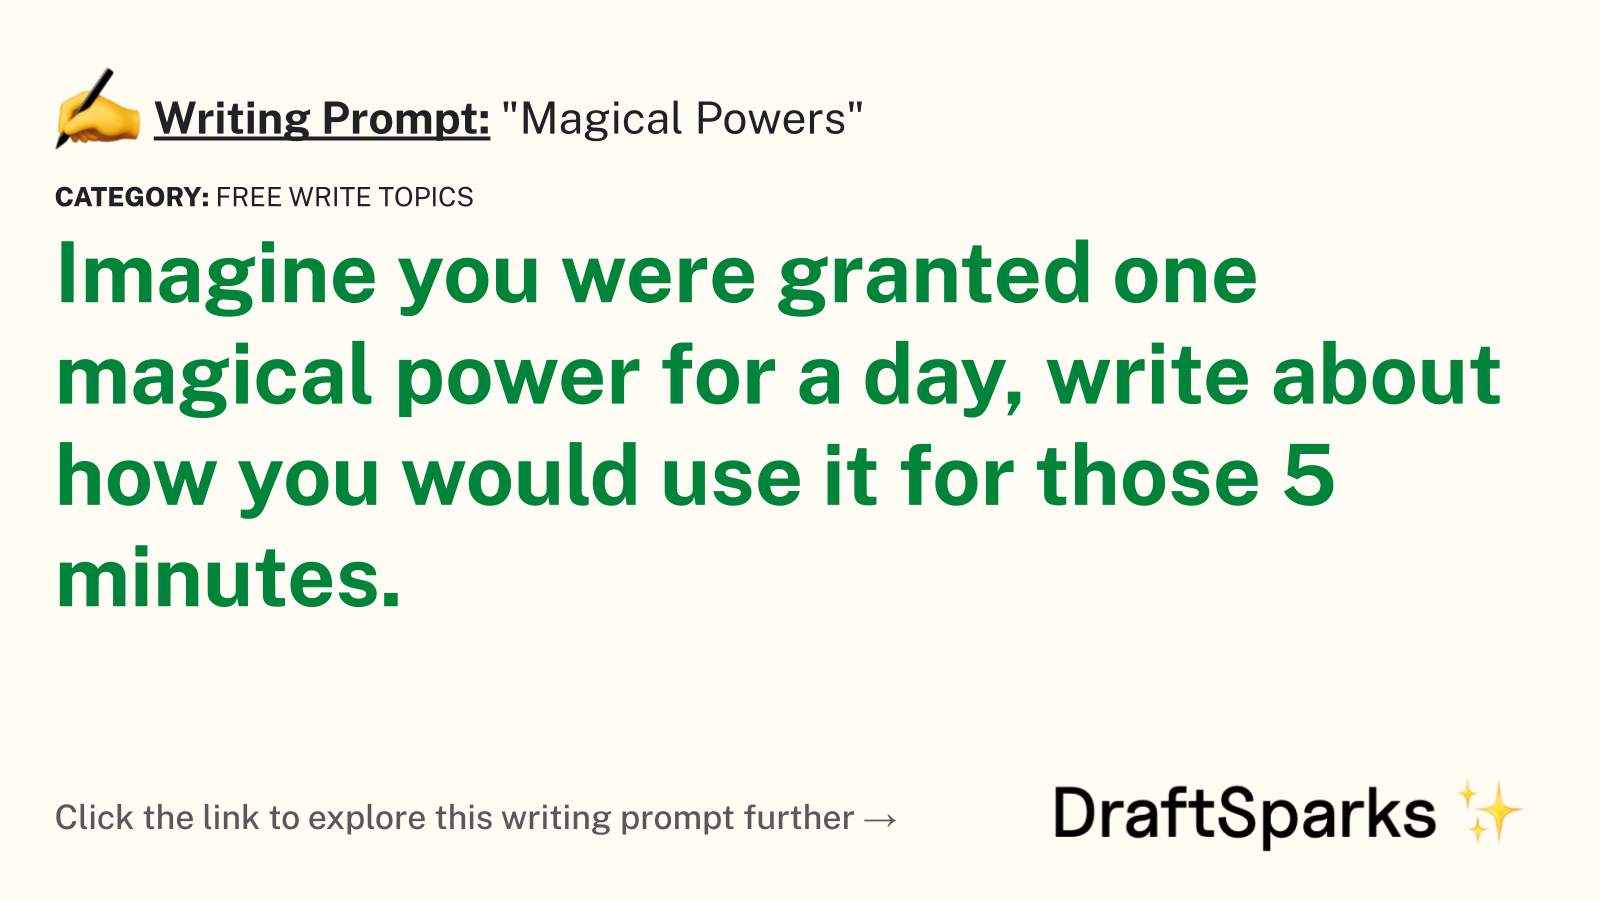 “Magical Powers”